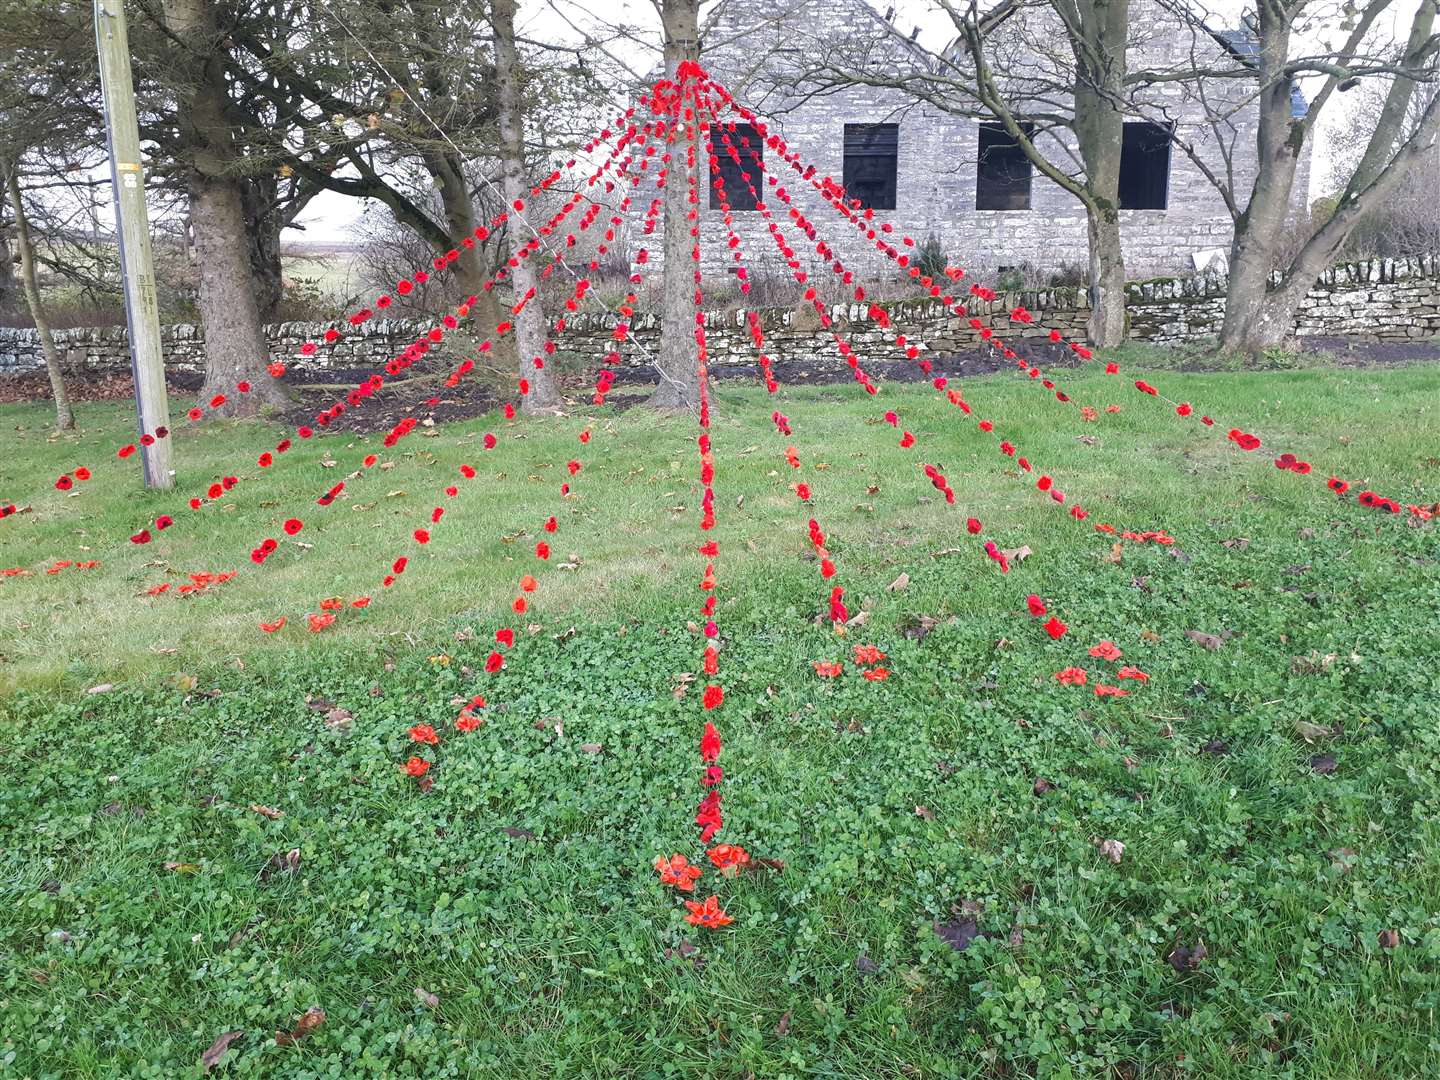 The poppy display at Latheron created by the Caithness Community Connection's craft group.